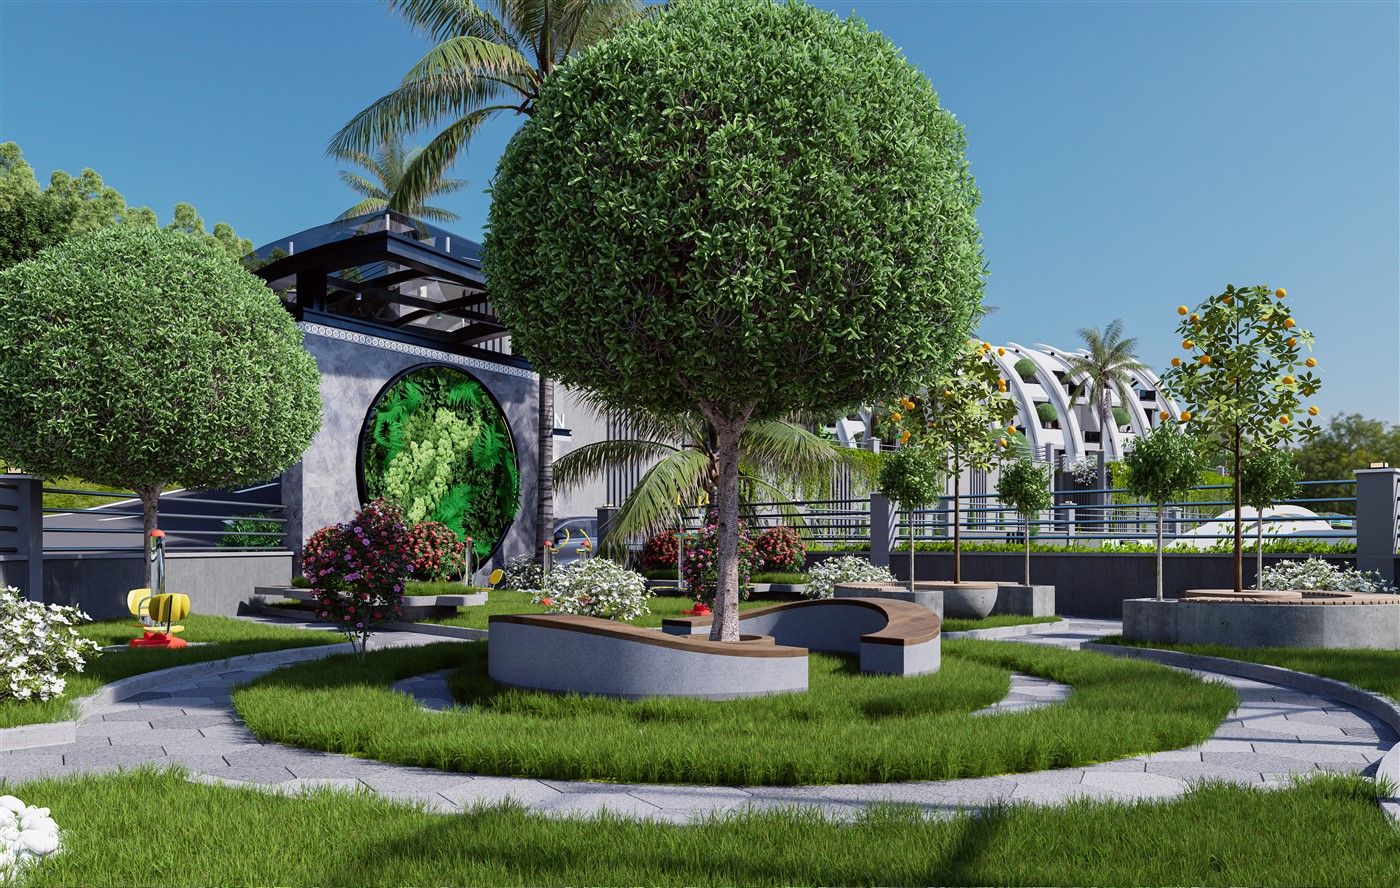 Large-scale project of villas and apartments surrounded by greenery